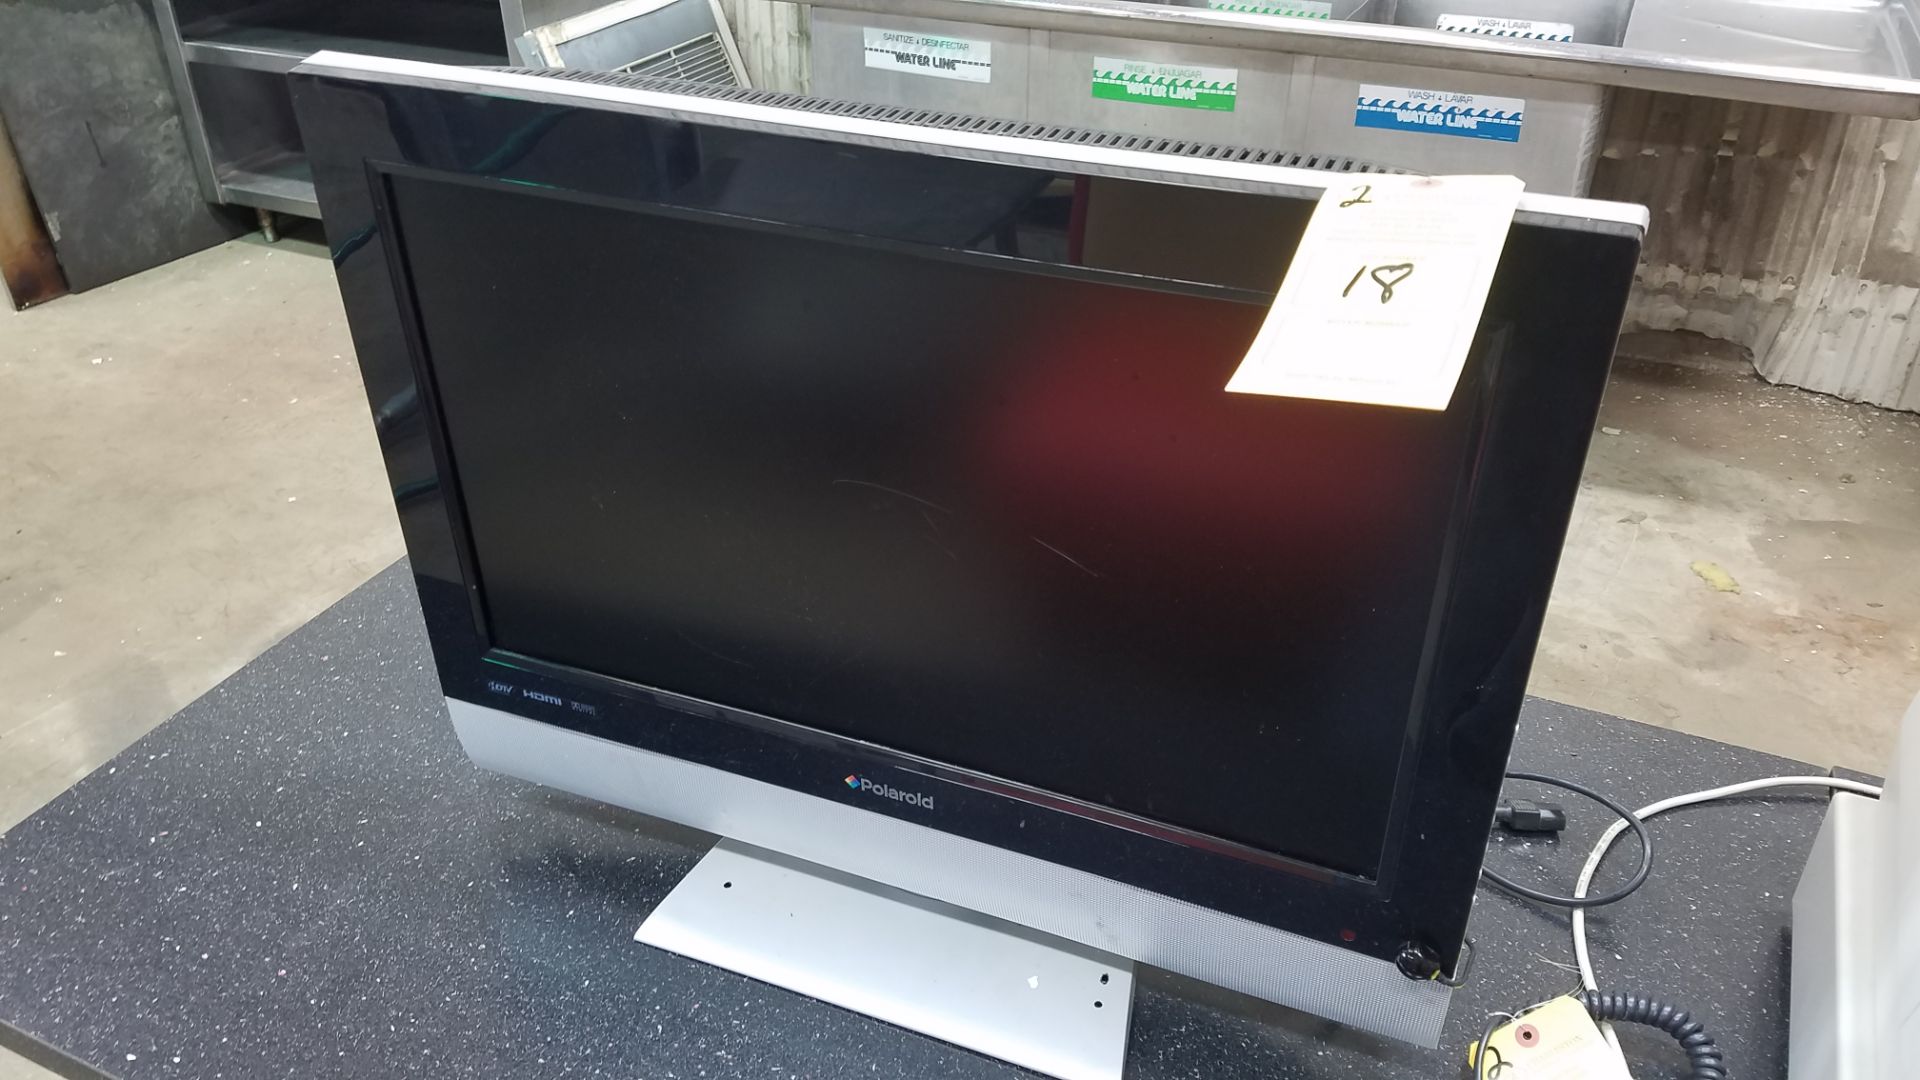 POLAROID COLOR FLAT PANEL TV; MODEL TDX-02611C W/DVD PLAYER (LOCATED AT 4409 NEW HAVEN AVENUE FORT